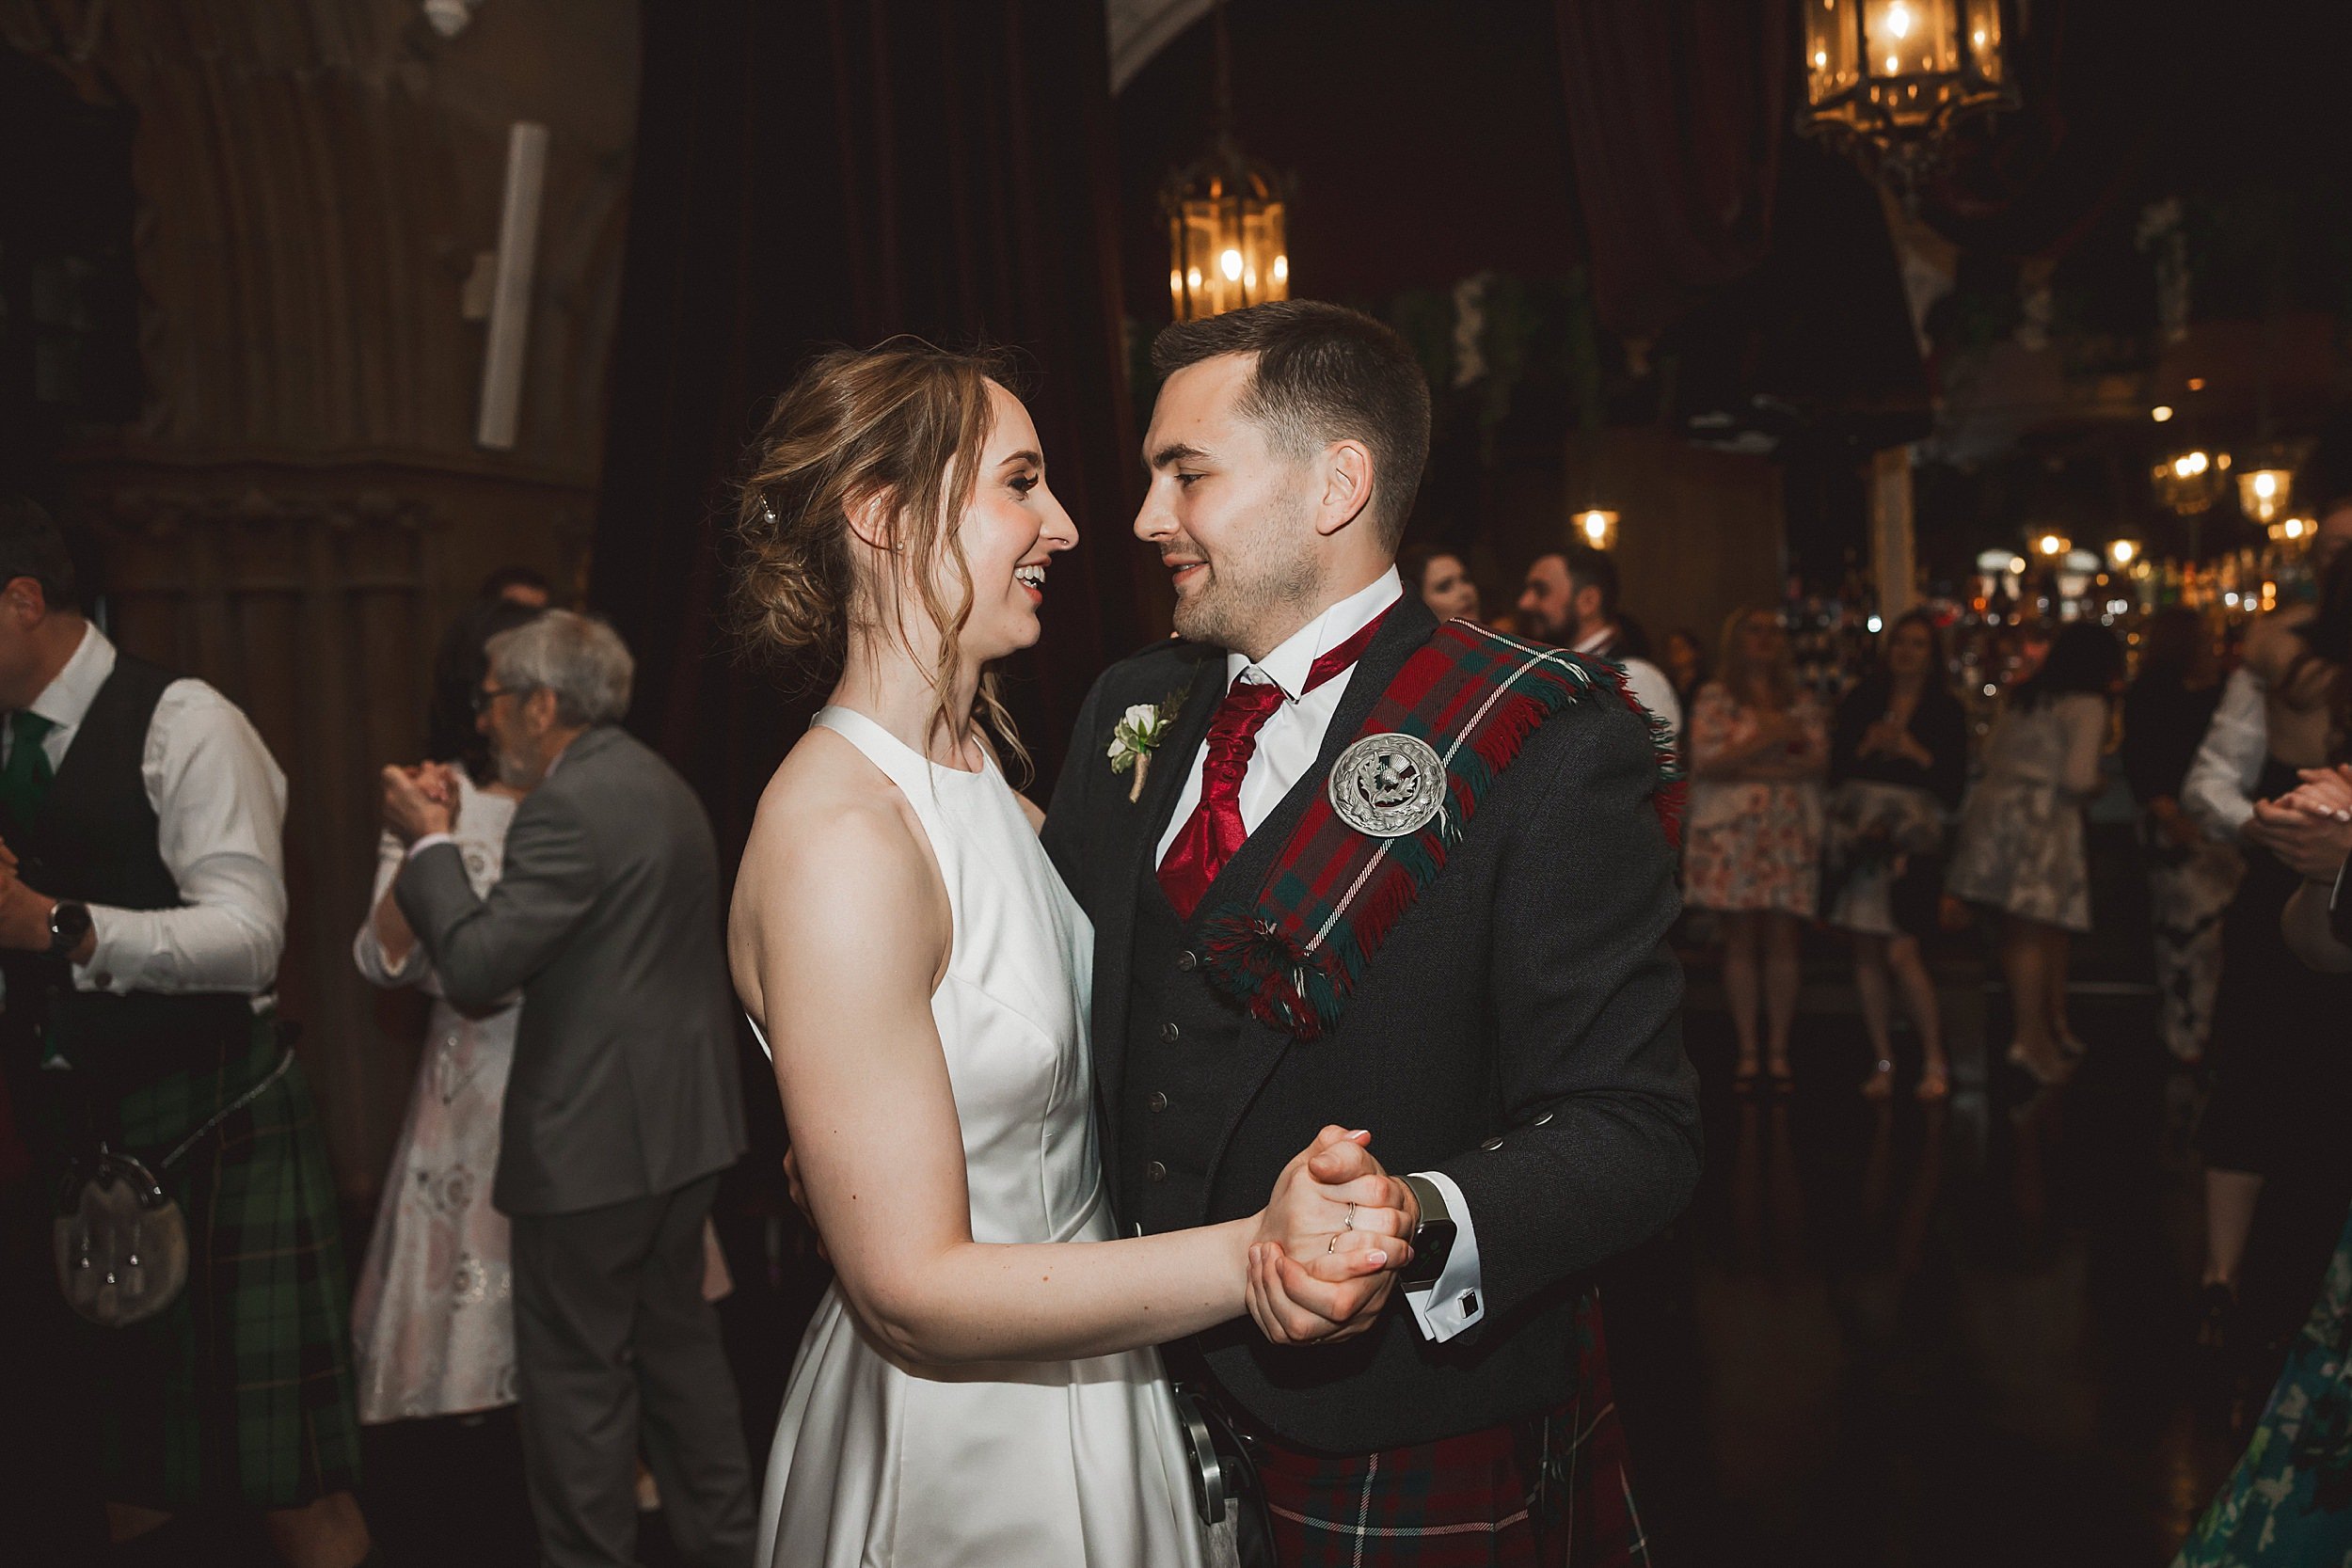 the bride and groom dance together in the auditorium at the ghillie dhu edinburgh wedding venue by documentary wedding photographer edinburgh